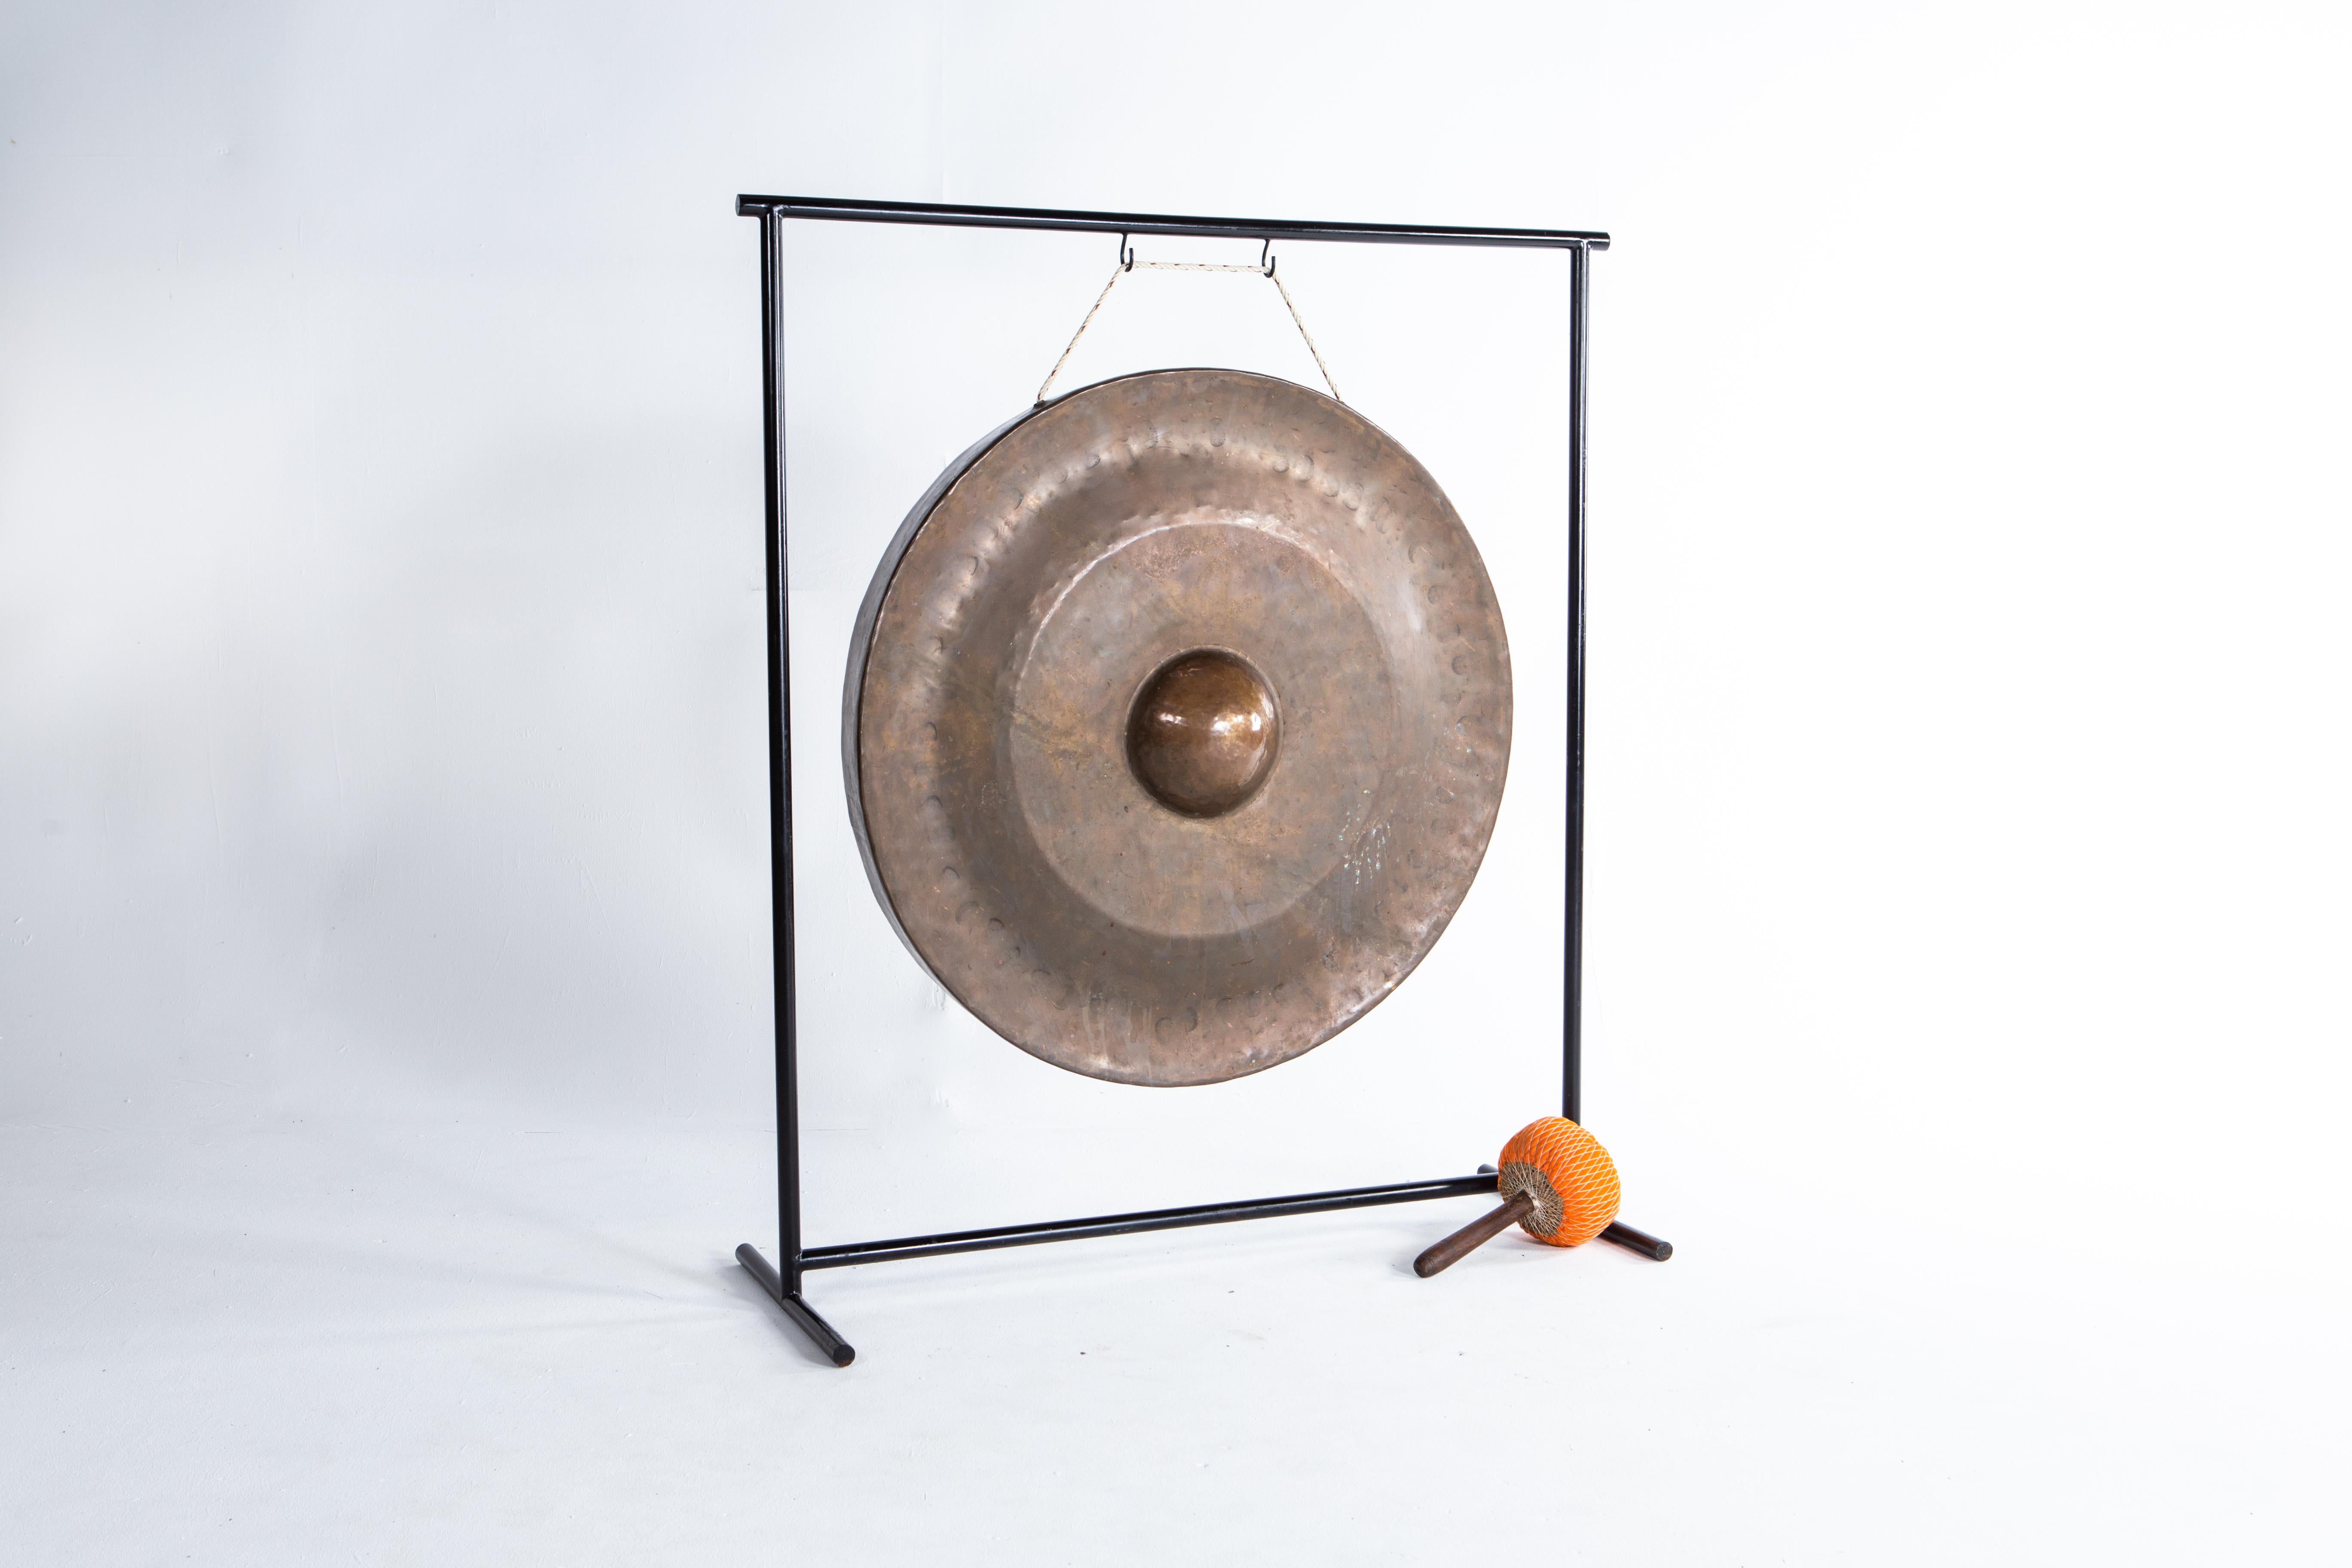 Large bronze gongs are suspended adjacent to Thai temple to allow visitors to make merit by sounding them.   This gong was once given to a temple in the Chiang Mai area to gain merit for the giver. According to Buddhist belief, meritorious gifts